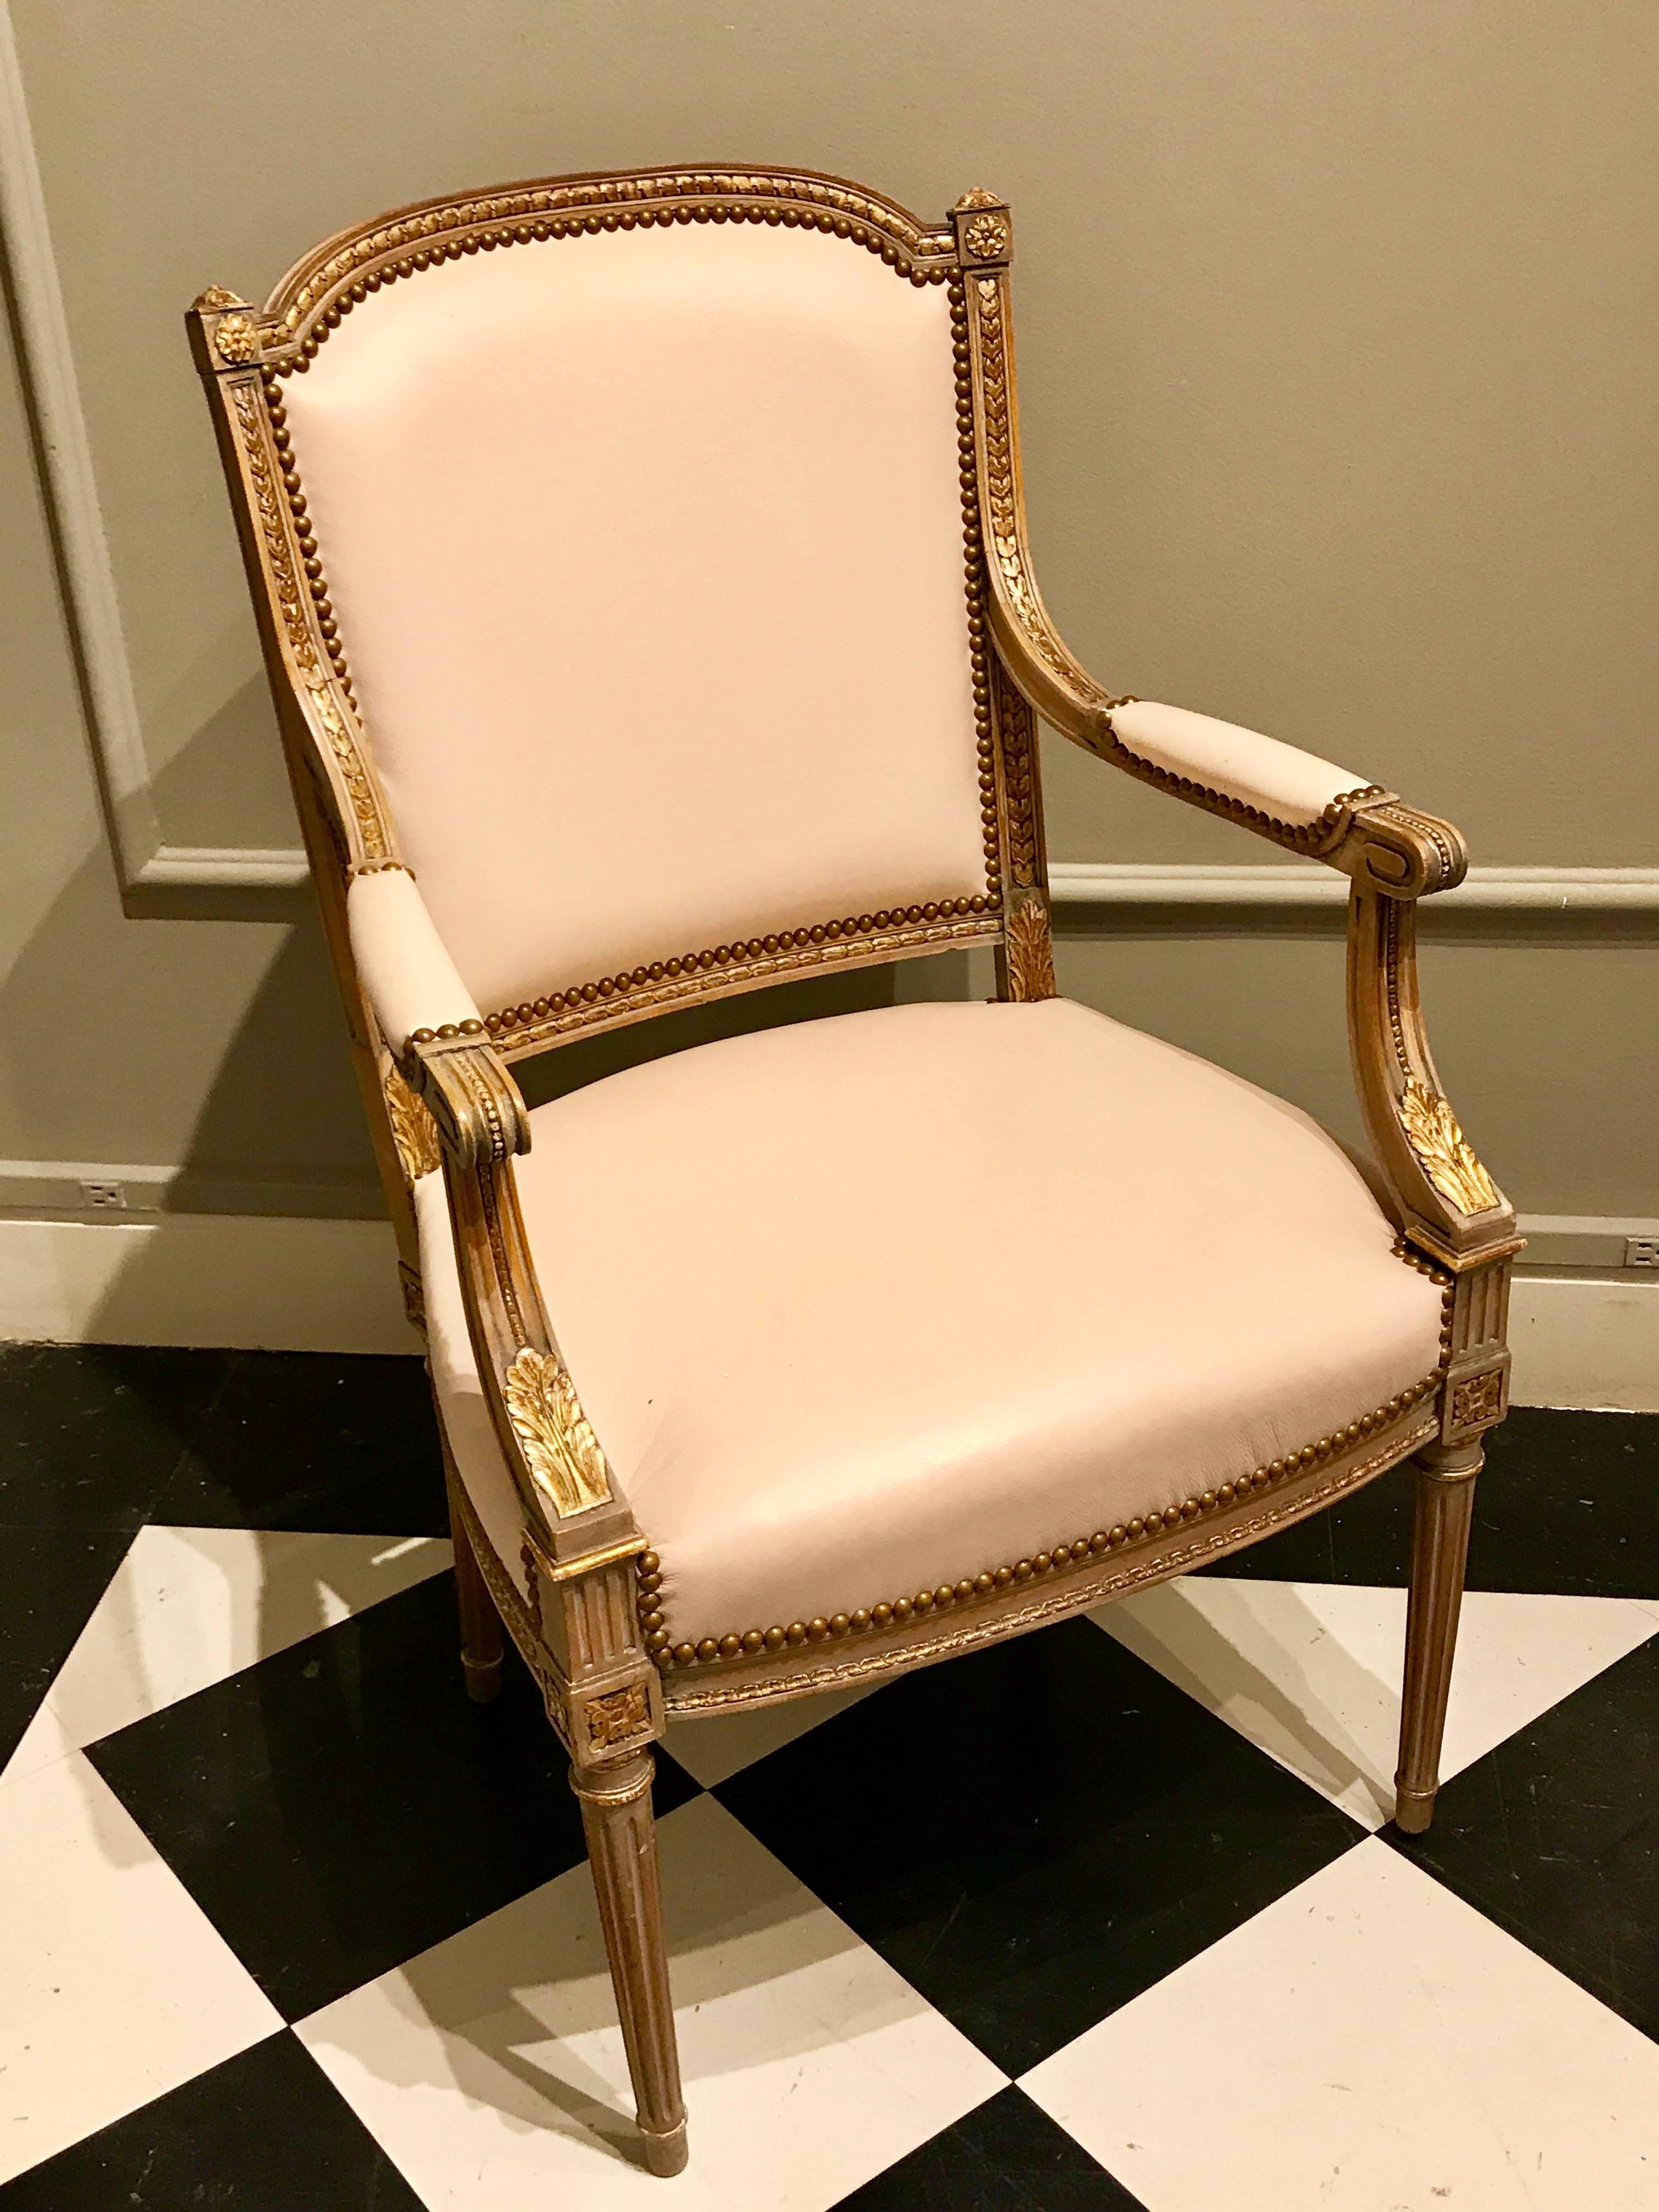 Four Maison Jansen Louis XVI cream leather upholstered parcel-gilt armchairs, an understated excellent set of four vintage leather upholstered Louis XVI style armchairs, great for the living room or can be used as dining chairs.